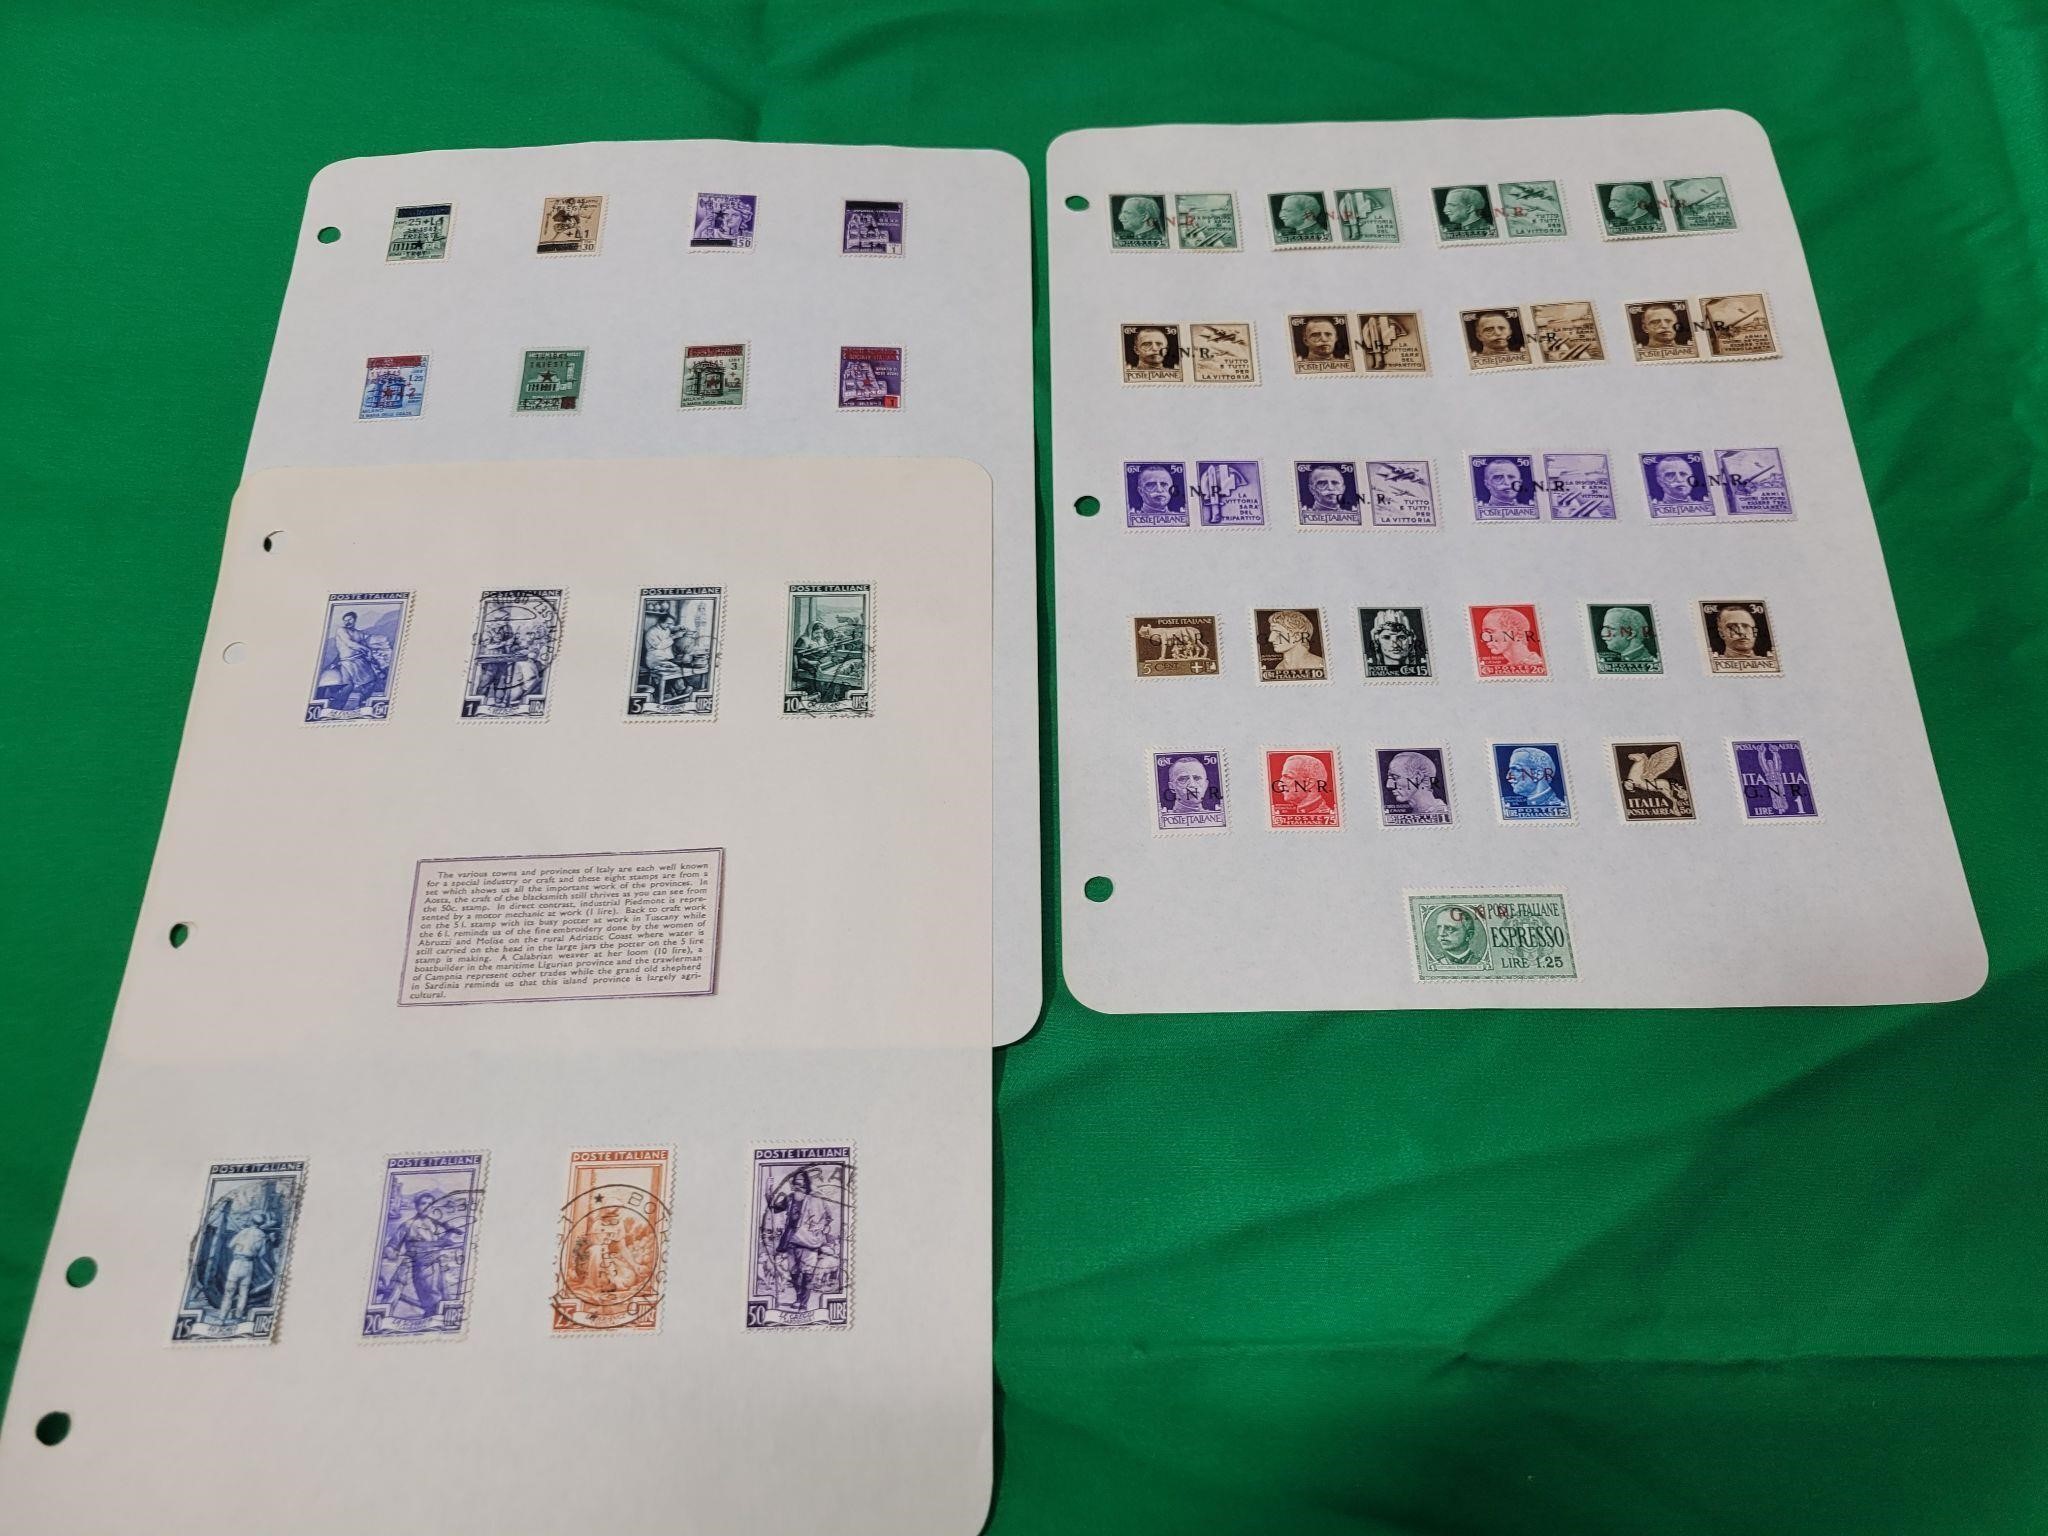 MHA May 9th Collectable Stamp Auction